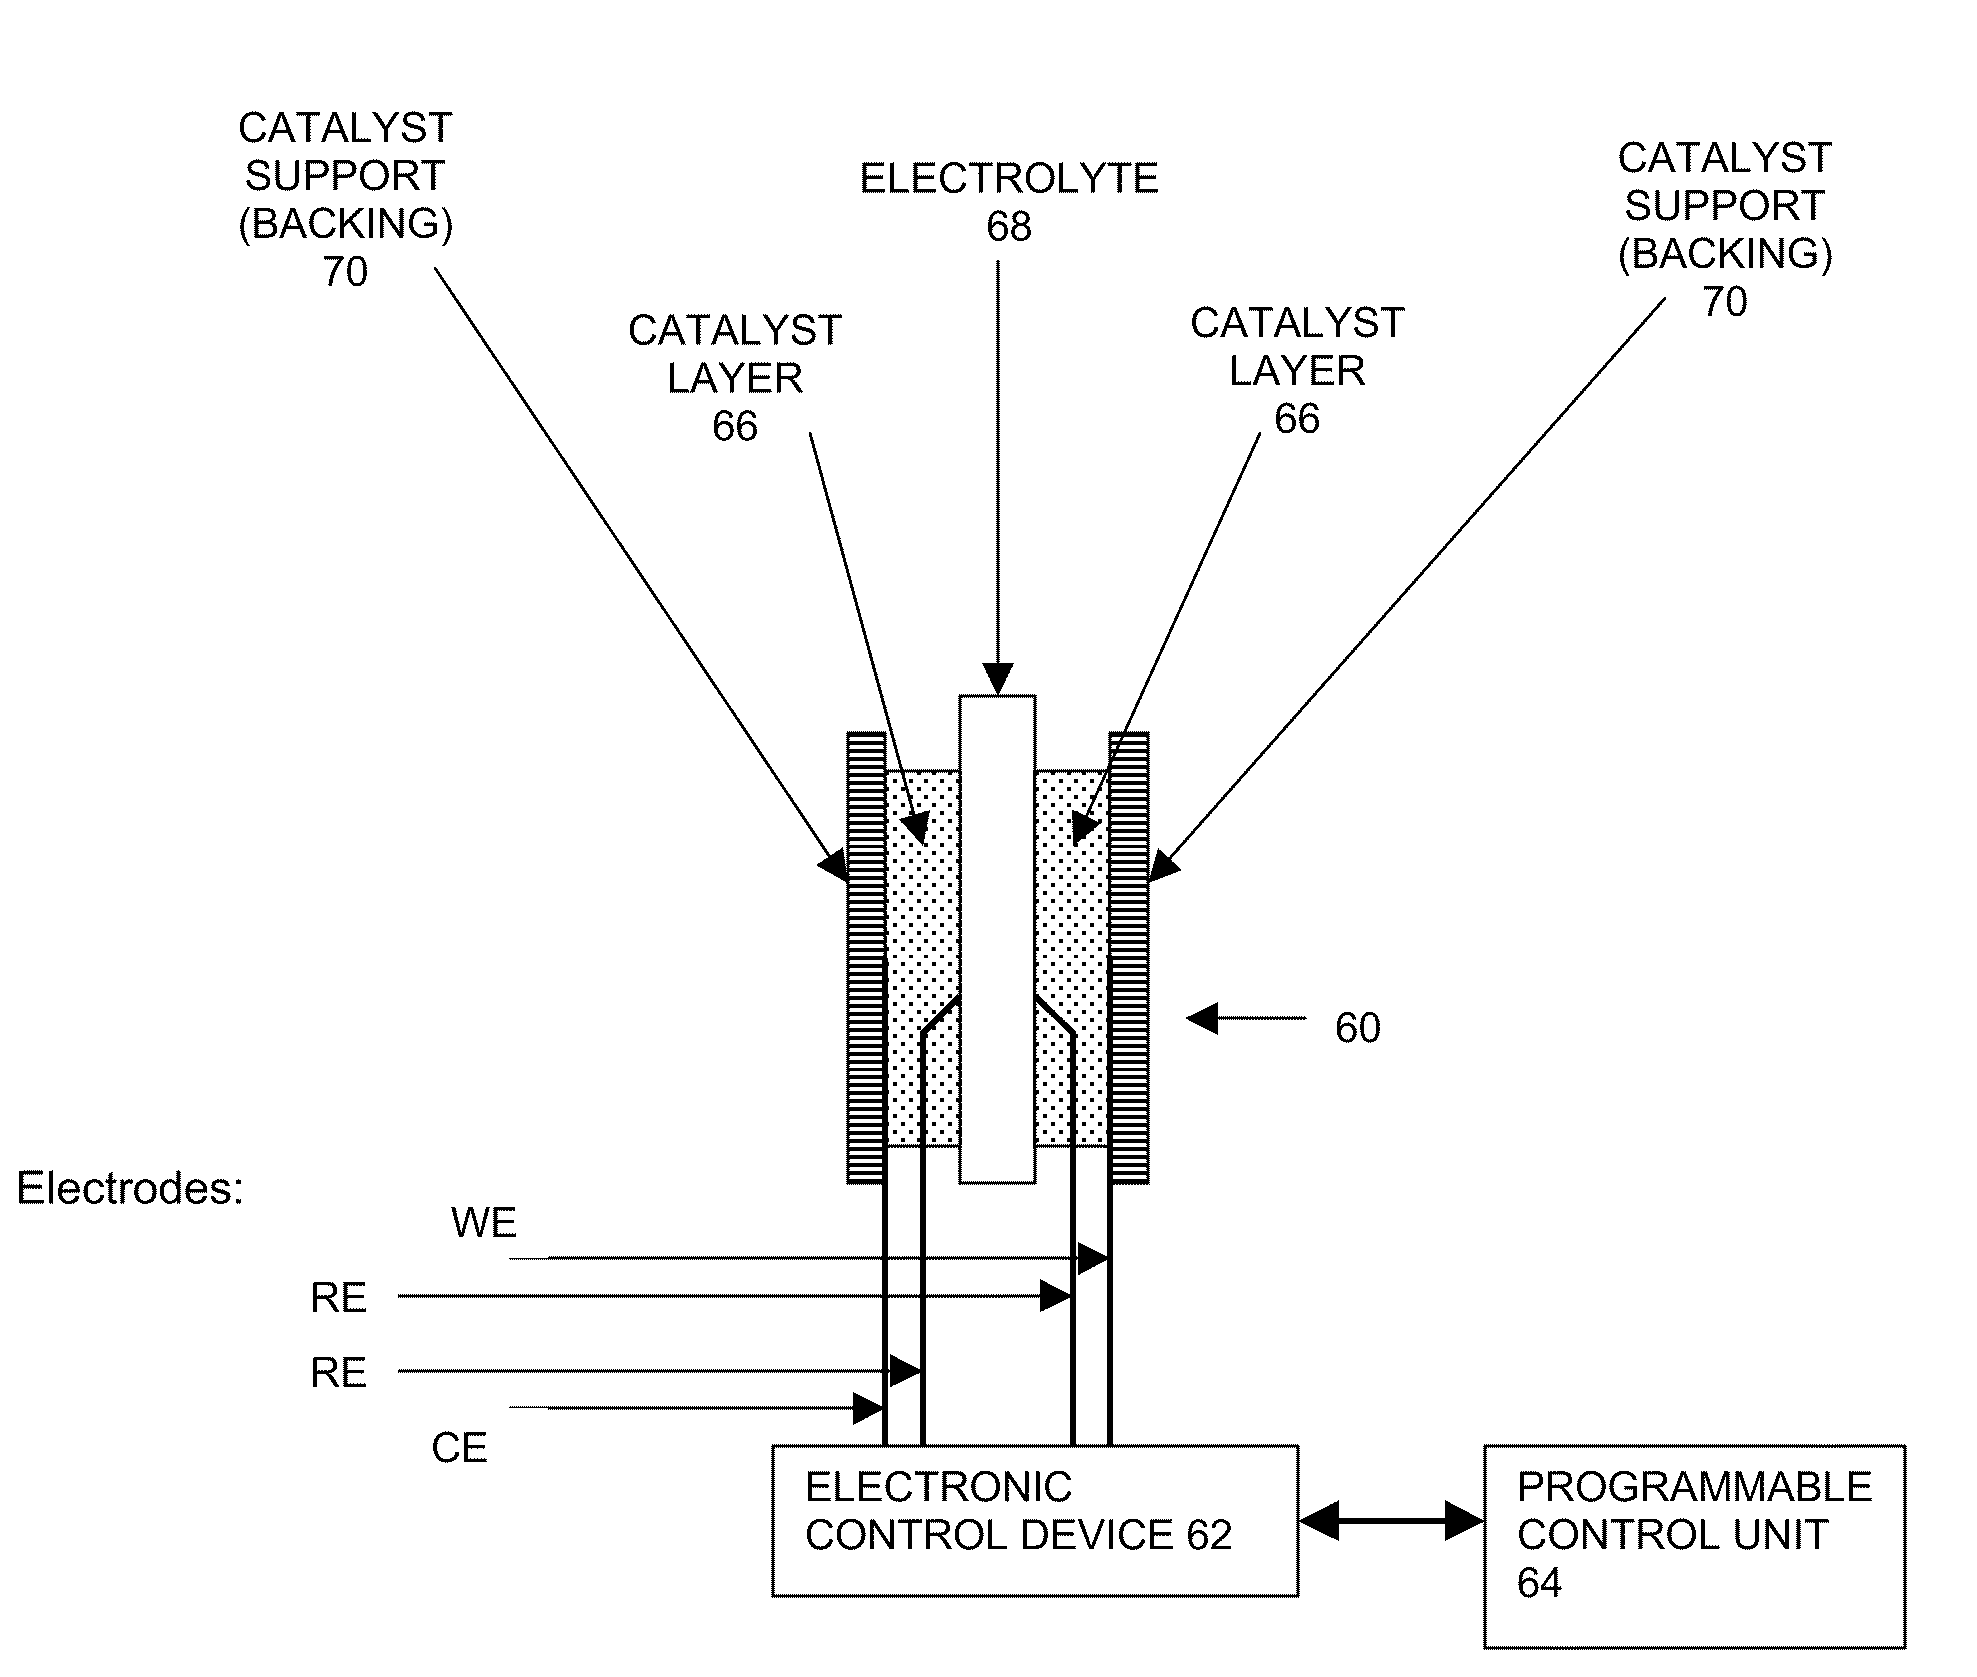 Methods and apparatus for controlling catalytic processes, including the deposition of carbon based particles